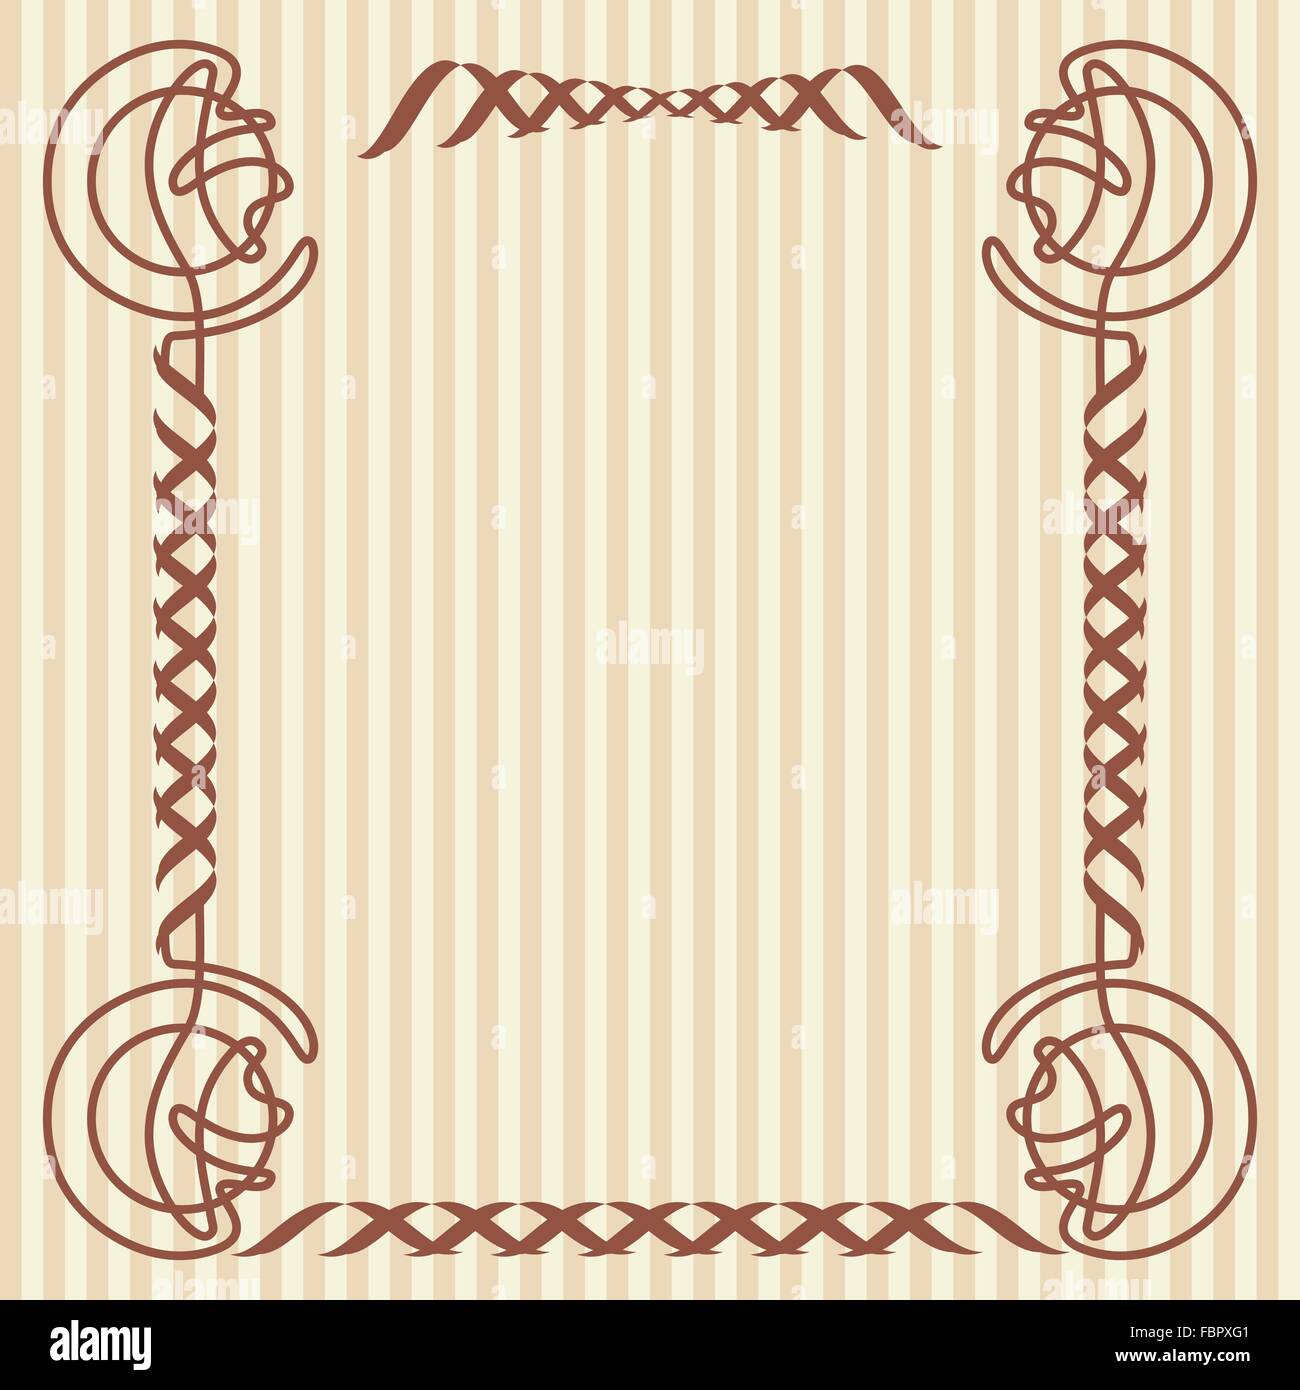 Square decorative frame in the art Nouveau style Stock Vector